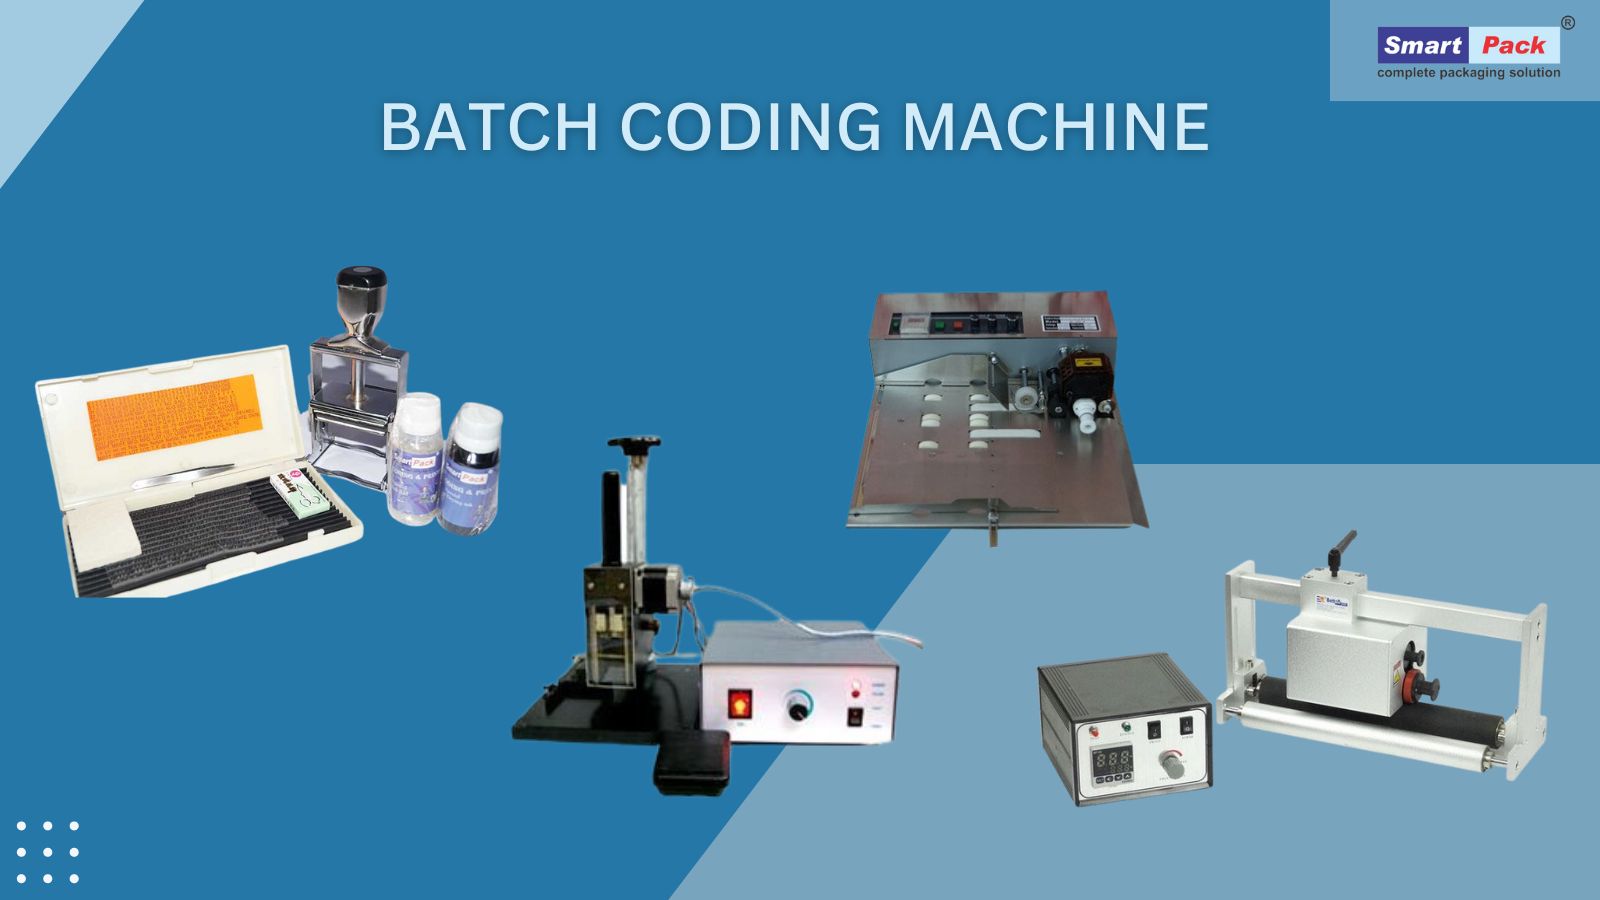 Batch coding machines have become essential tools for small business owners